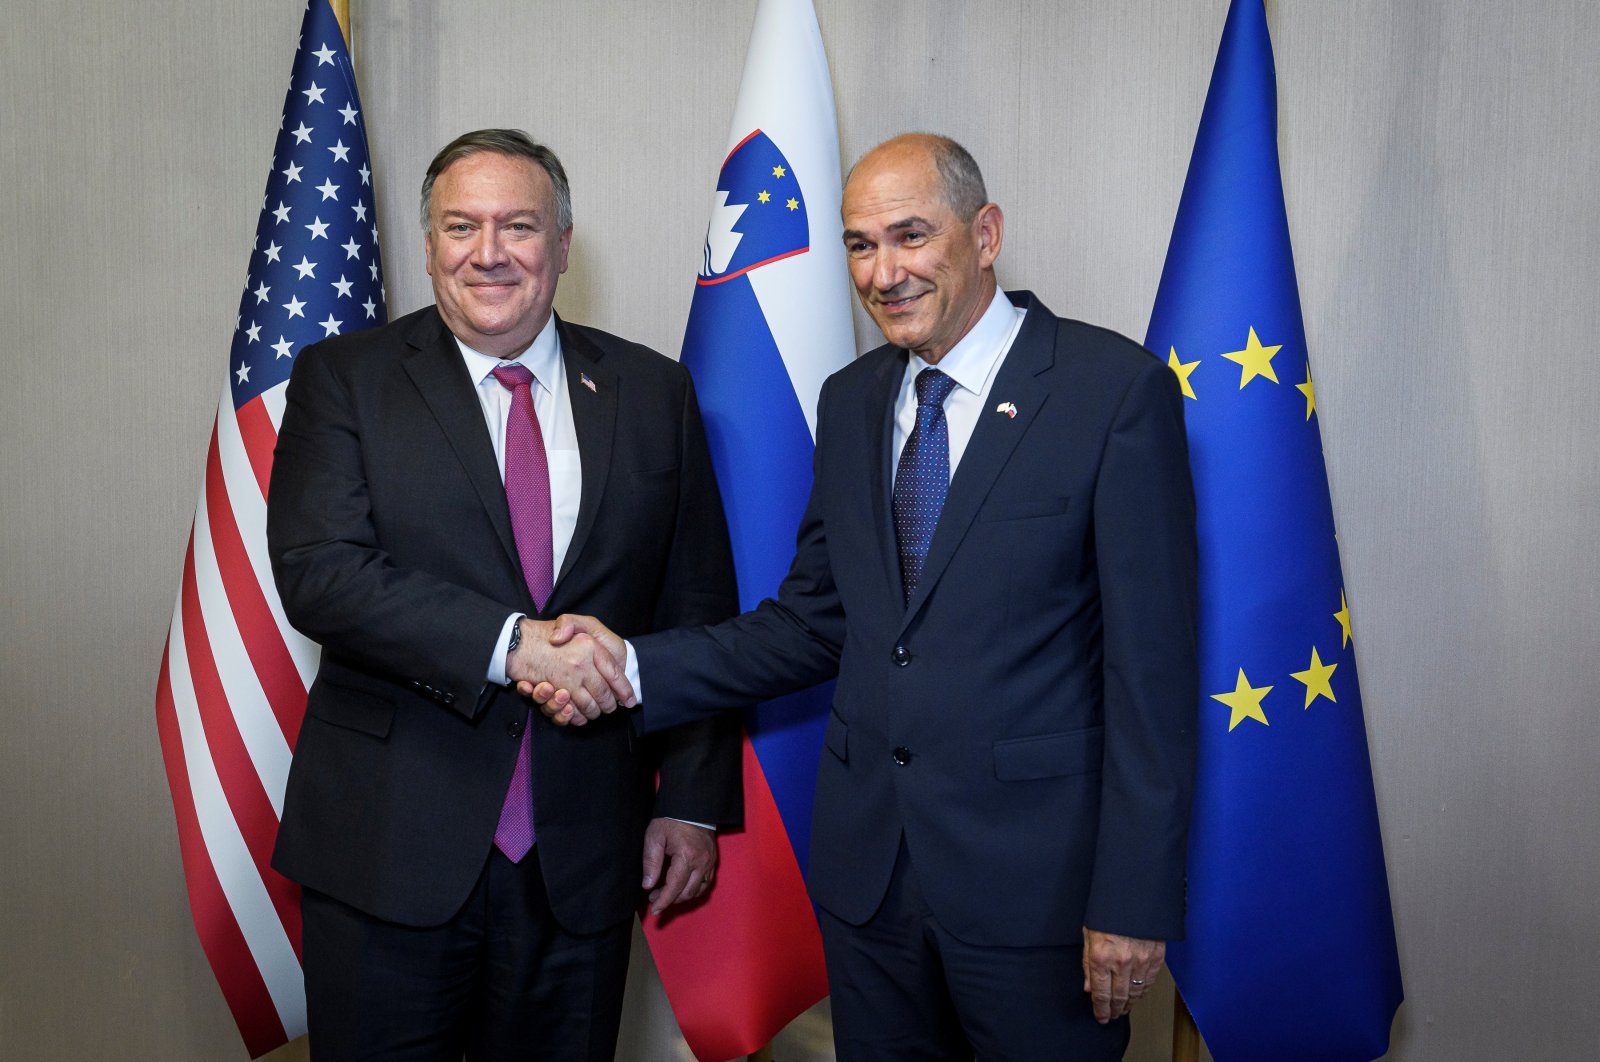 Slovenian Prime Minister Janez Jansa (R) shakes hands with U.S. Secretary of State Mike Pompeo ahead of their meeting in Bled, Slovenia, during Pompeo's four-nation visit to Central Europe, Aug. 13, 2020. (Reuters Photo)